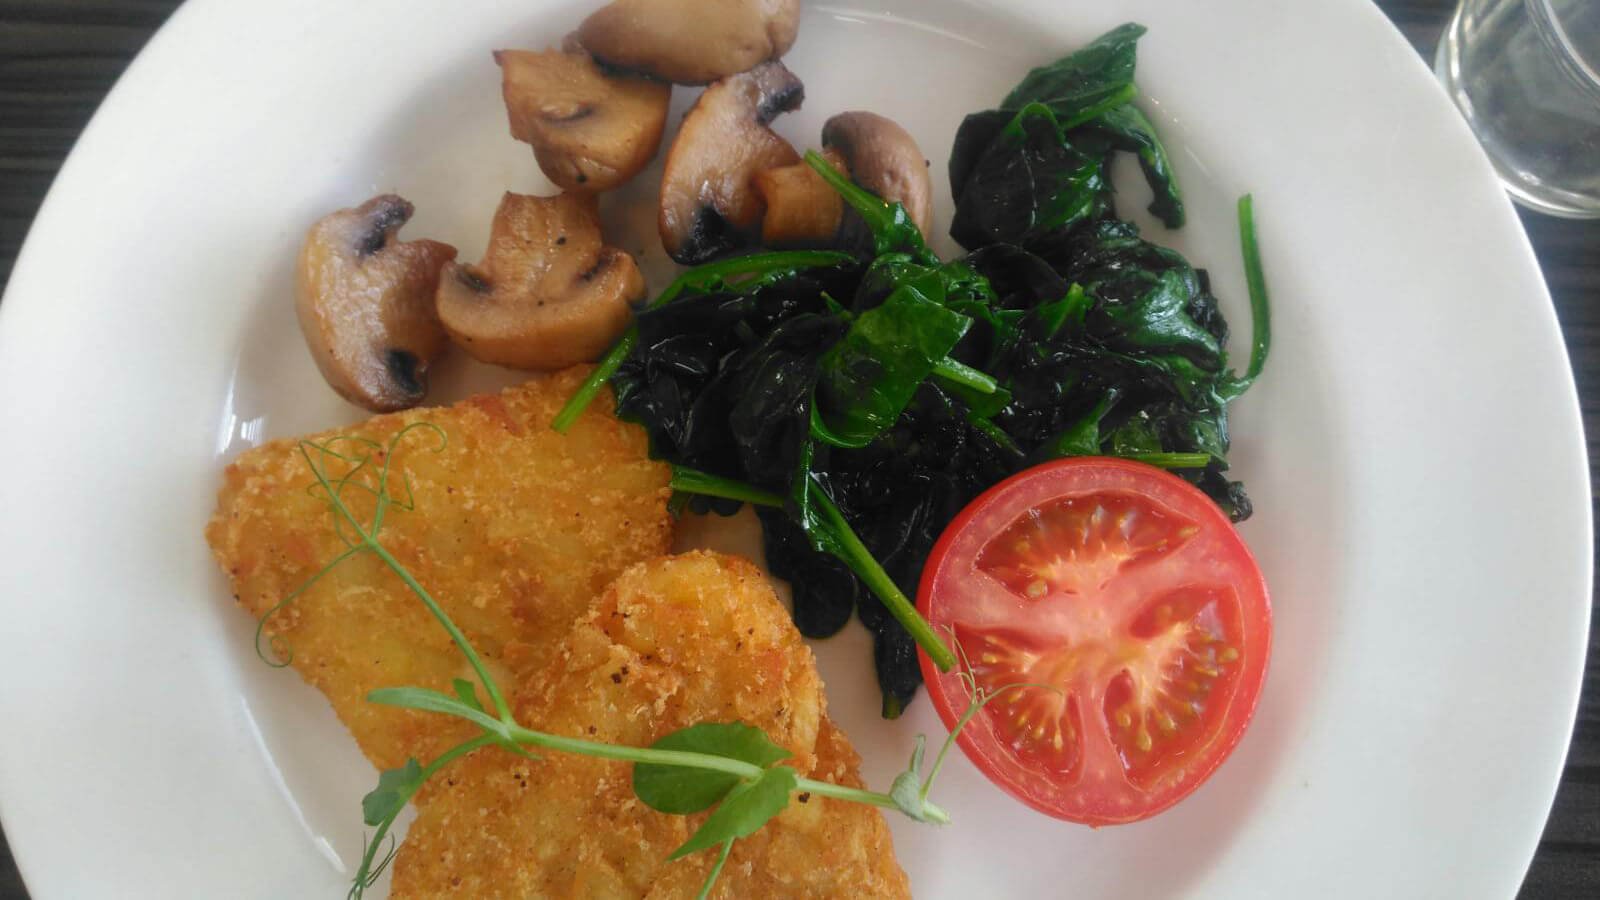 Hash browns, tomatoes, spinach and mushrooms in a vegetarian Irish breakfast, as included on our small-group tours of Ireland